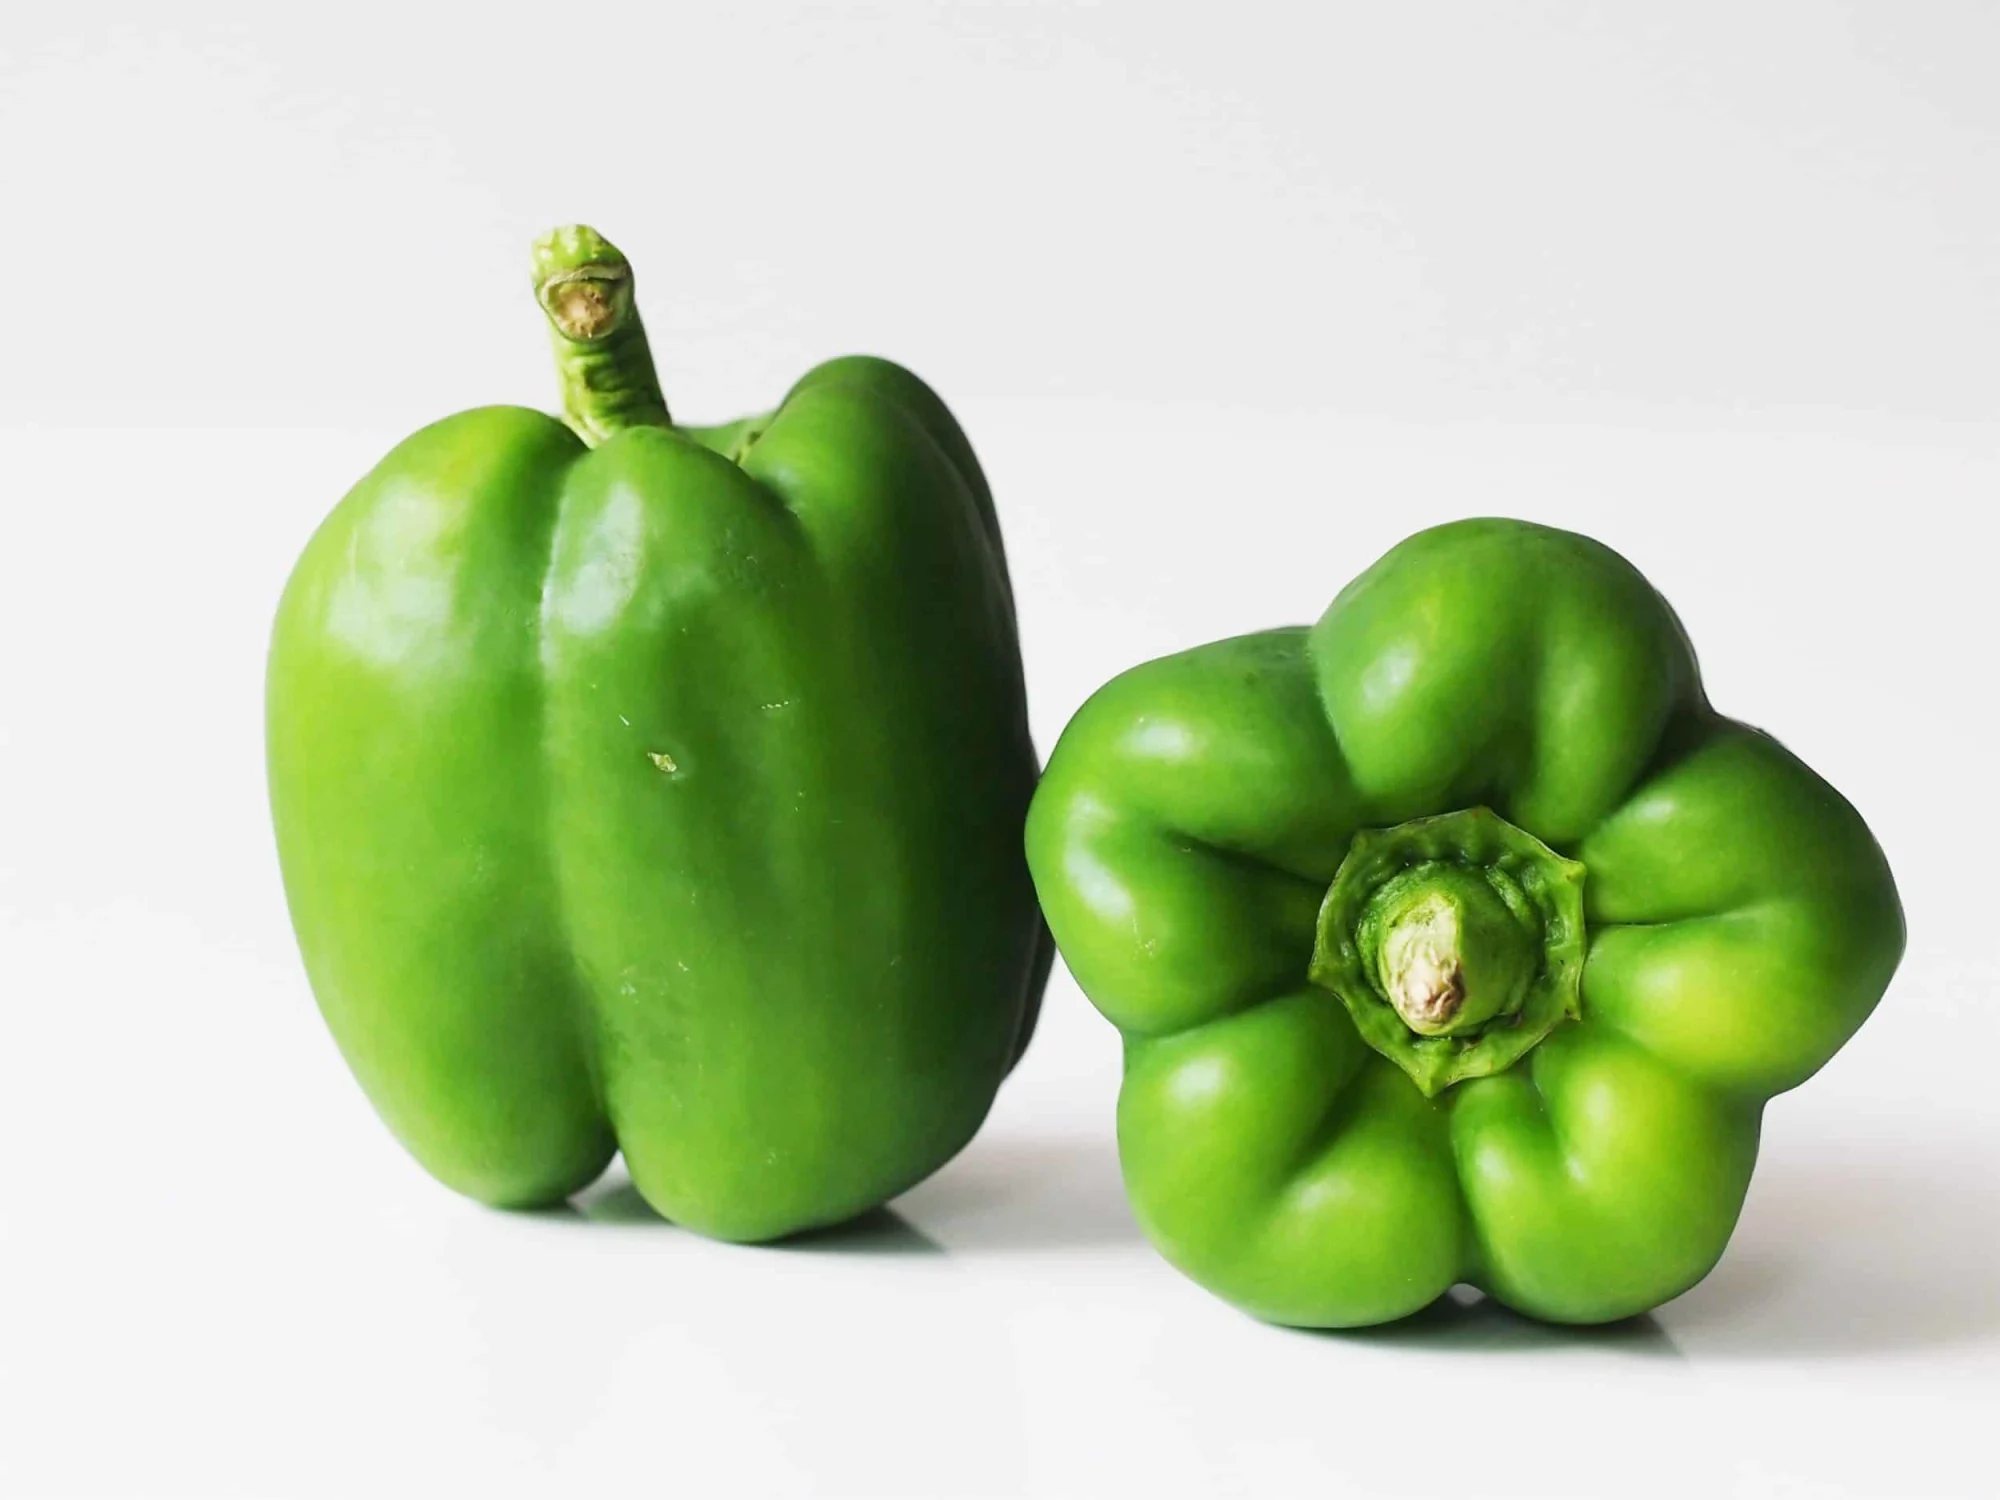 What Are Bell Peppers?